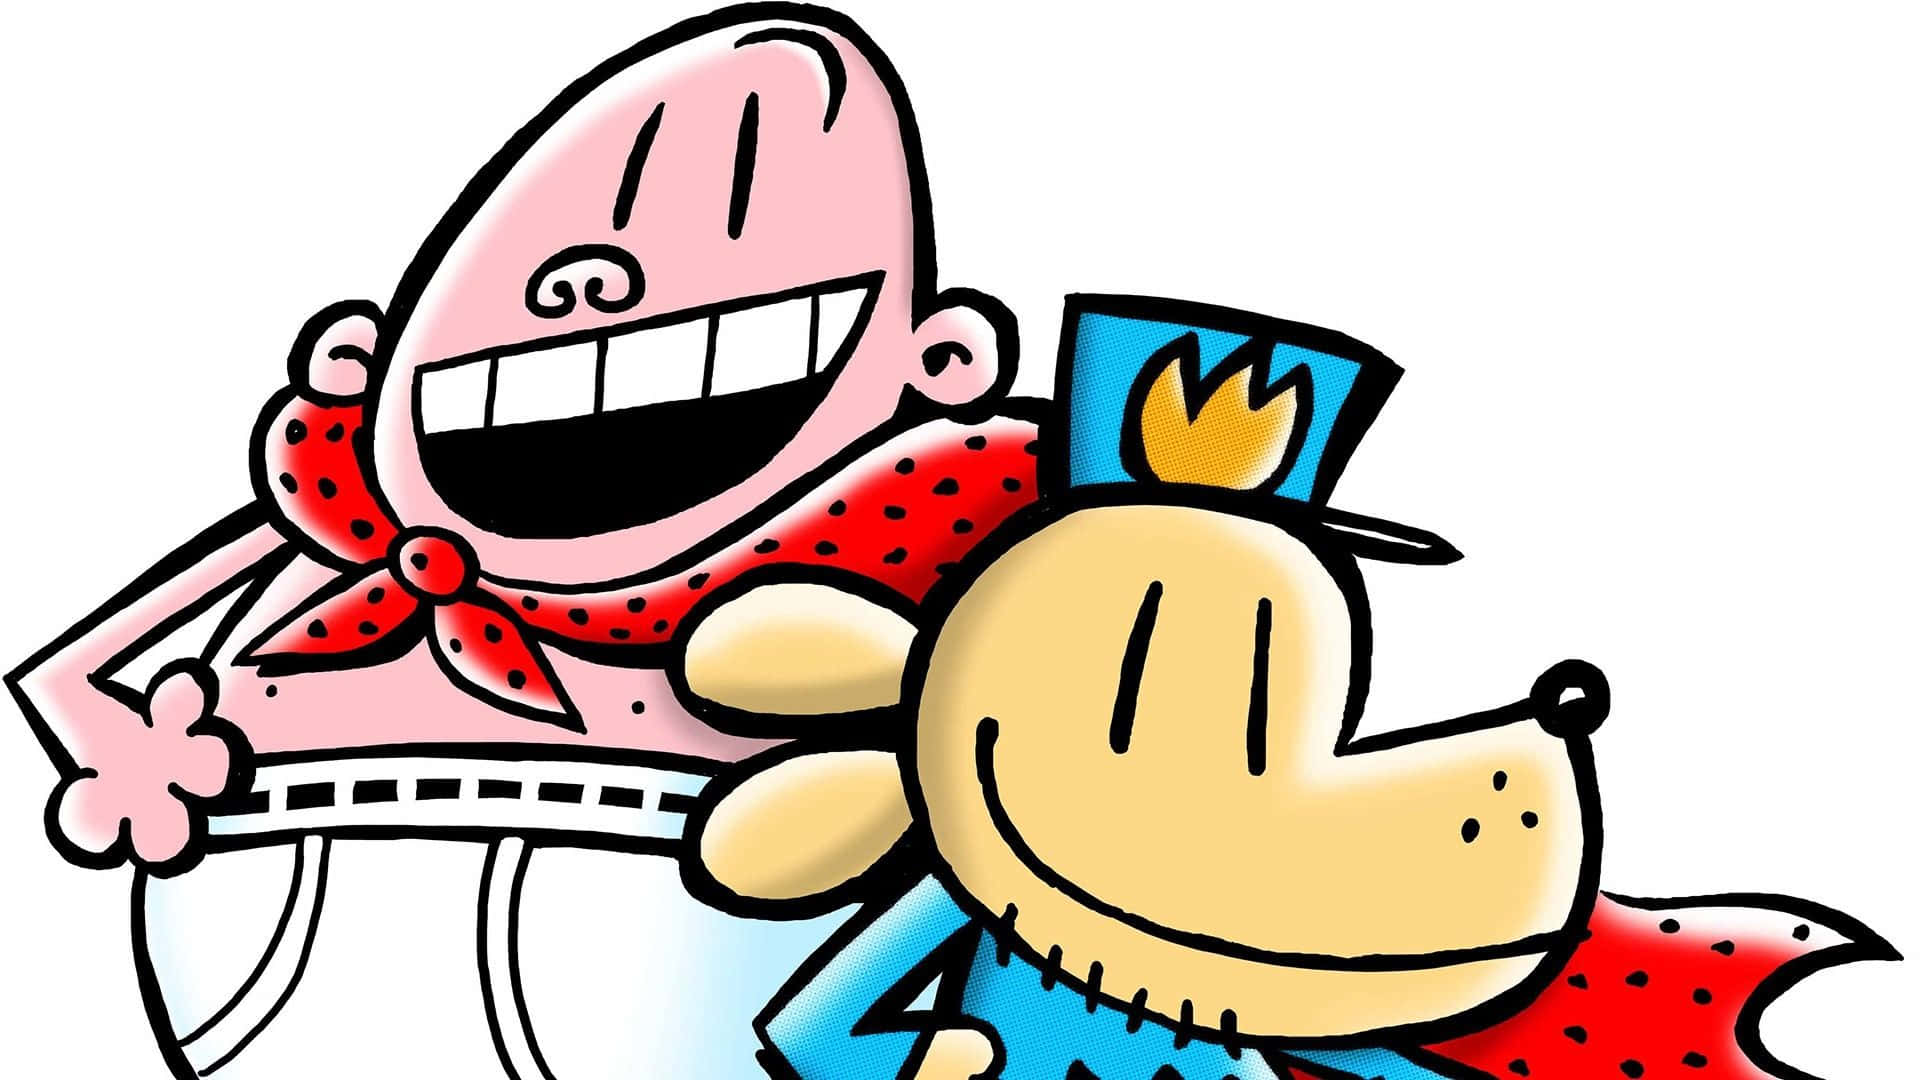 Dog Man And Captain Underpants: The First Epic Movie Wallpaper